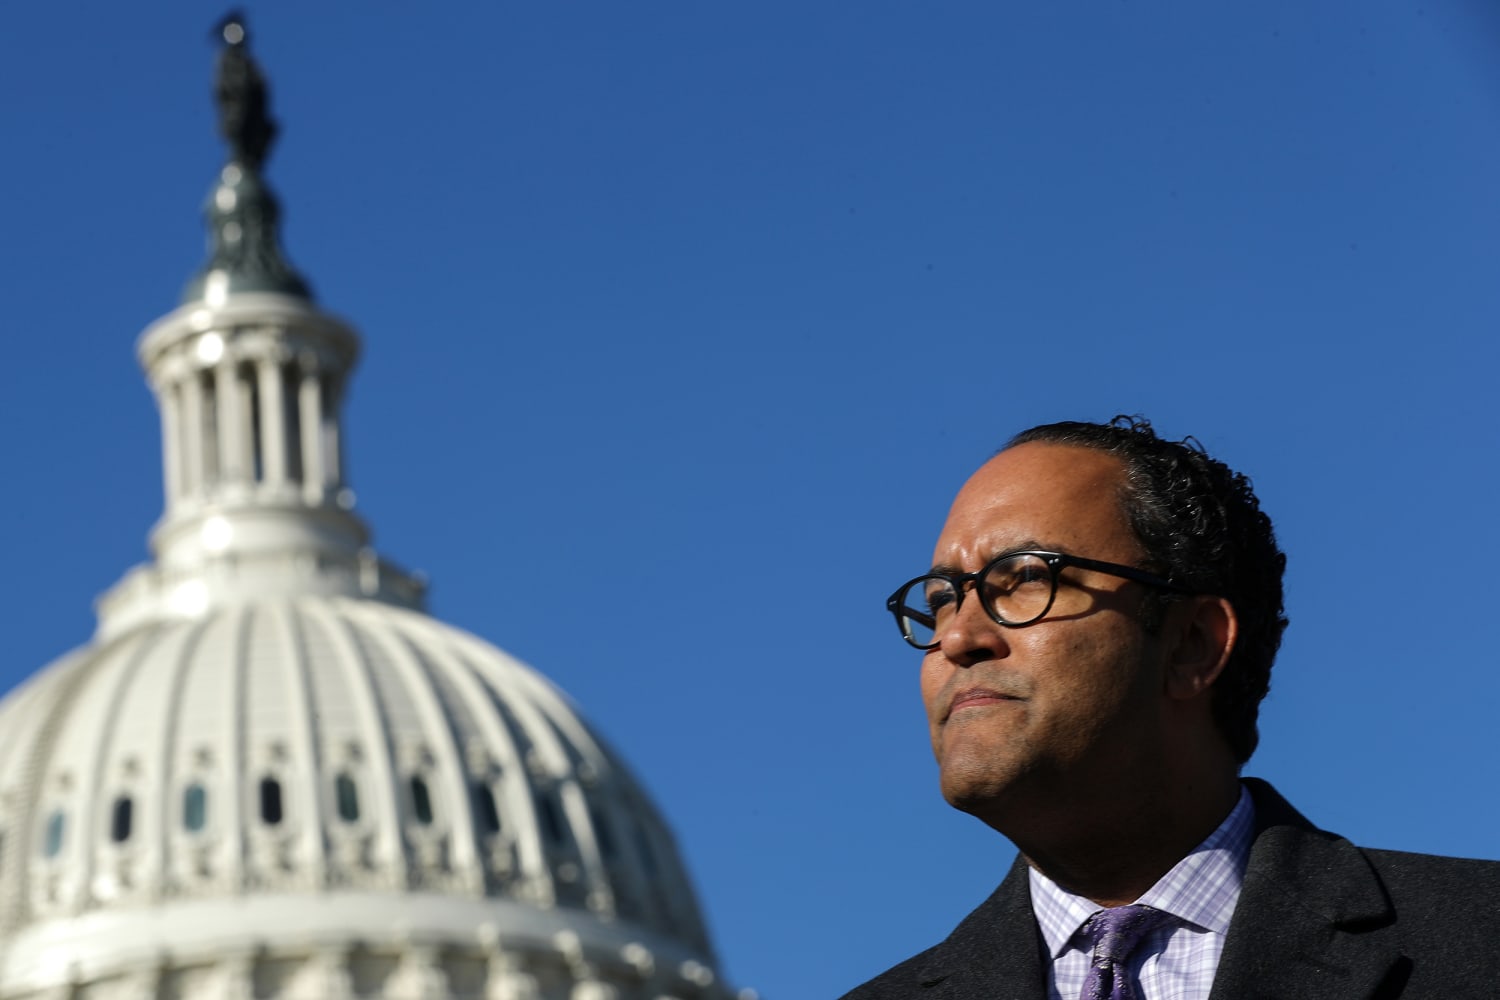 Former Texas Rep. Will Hurd jumps into the 2024 GOP presidential race